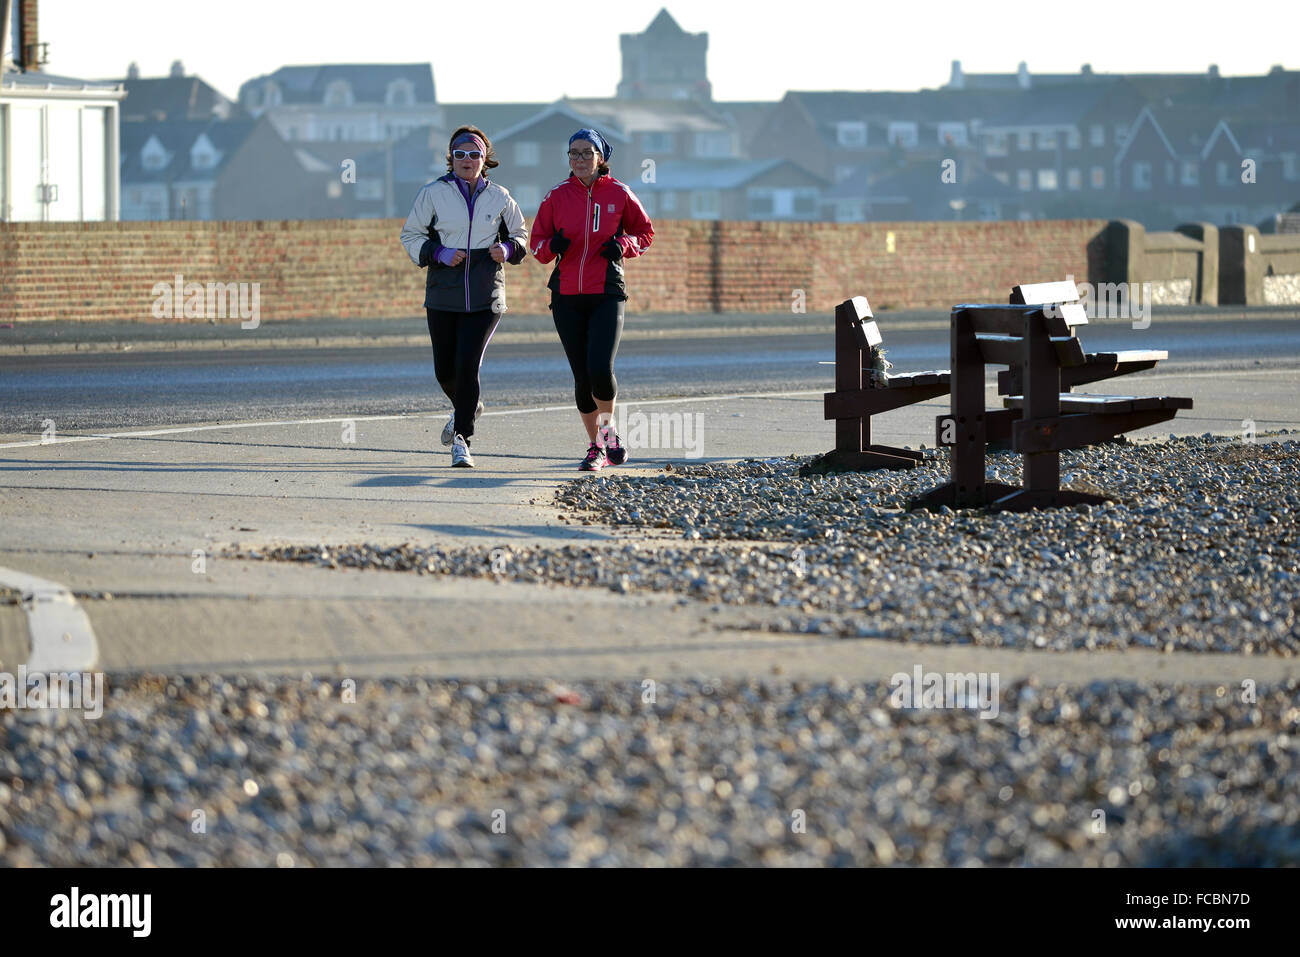 Joggers on Seaford seafront, UK Stock Photo